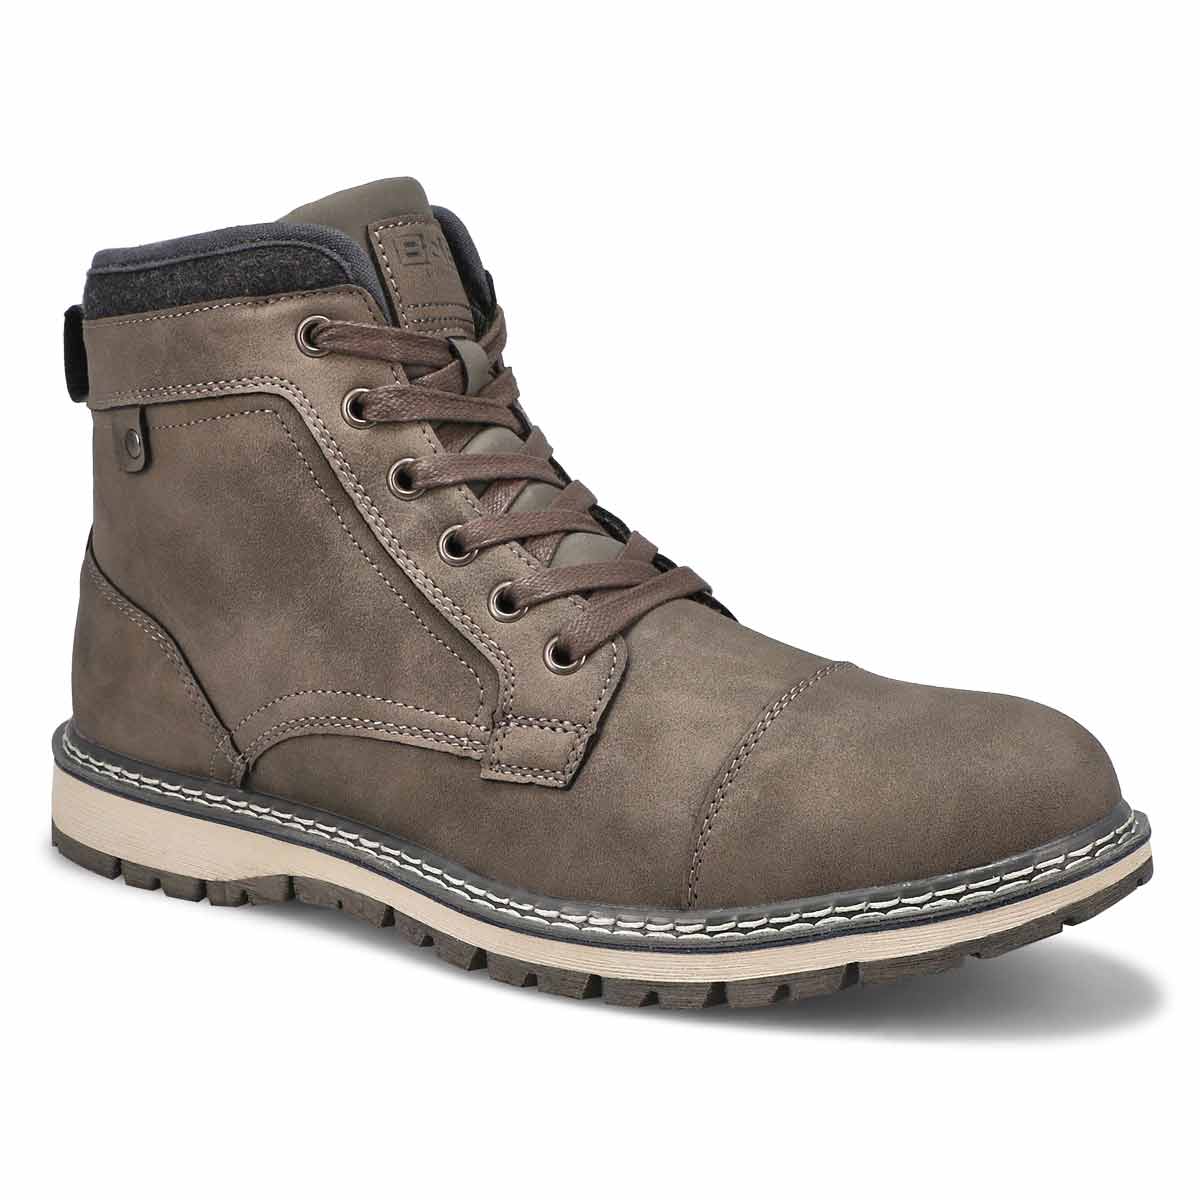 Men's Bucky Ankle Boot - Taupe